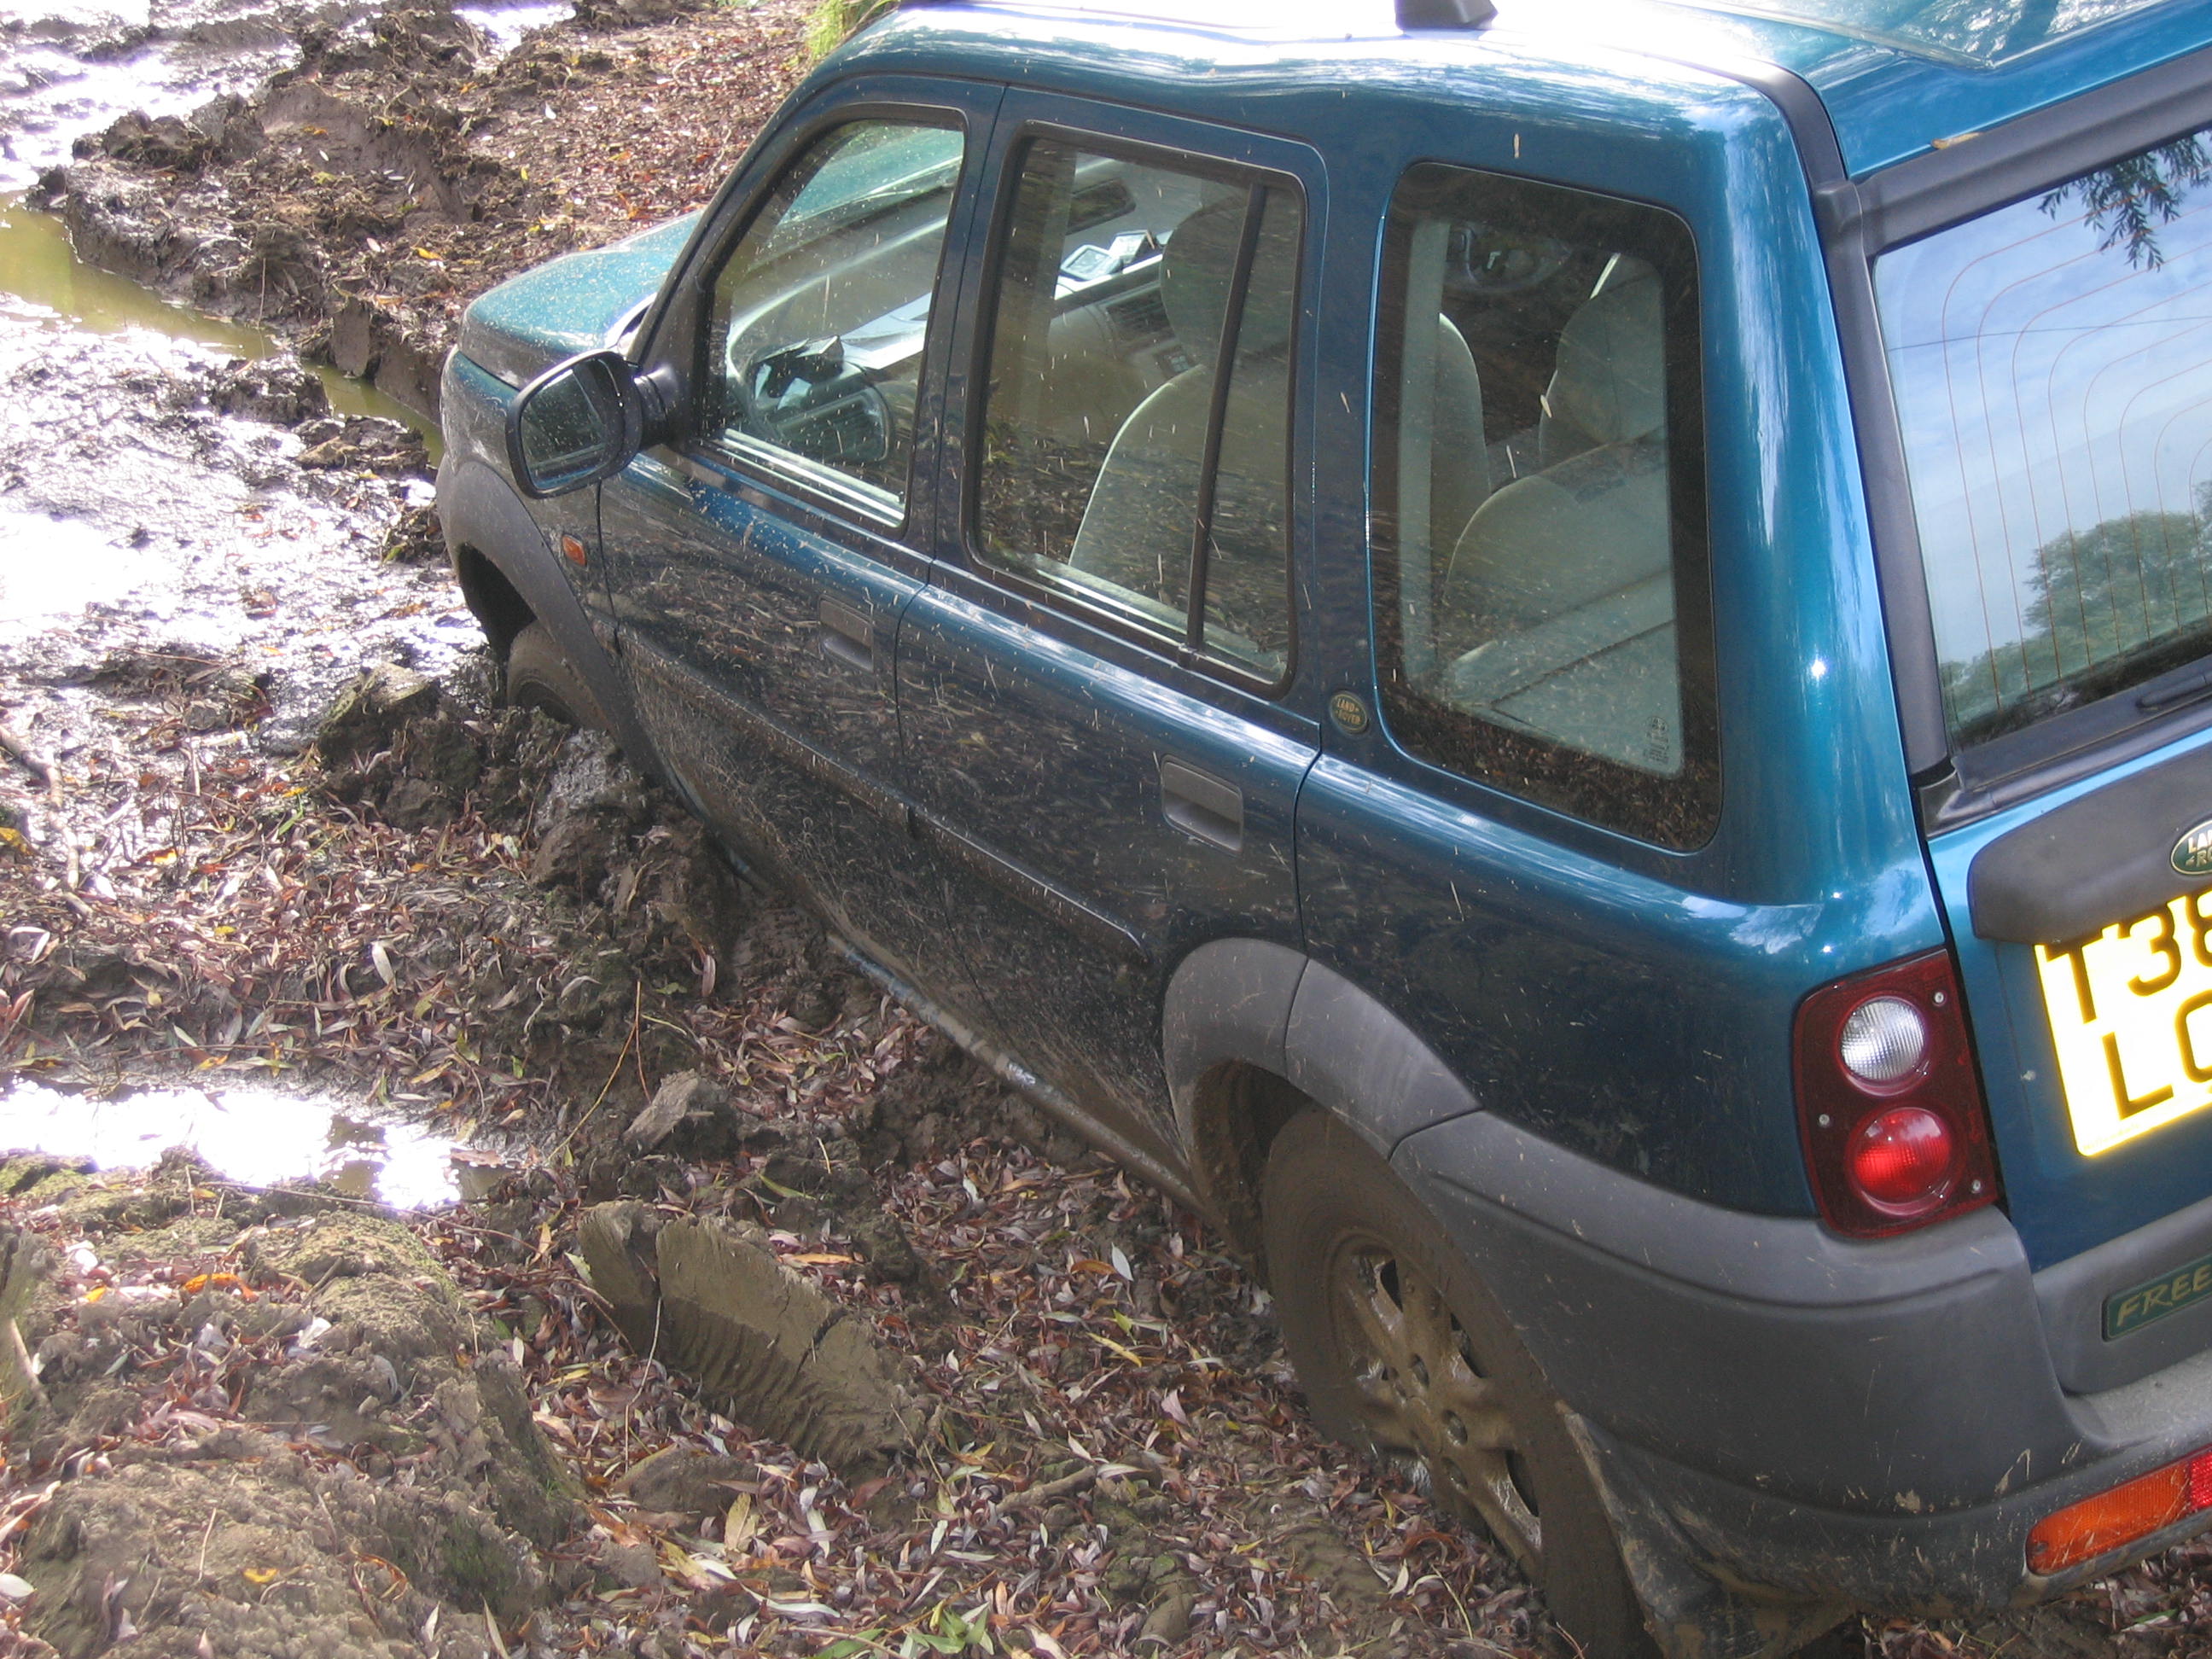 What Is The Hill Descent Control (Hdc) On My Freelander For And How Do I Use It? « Freelanderspecialist.com